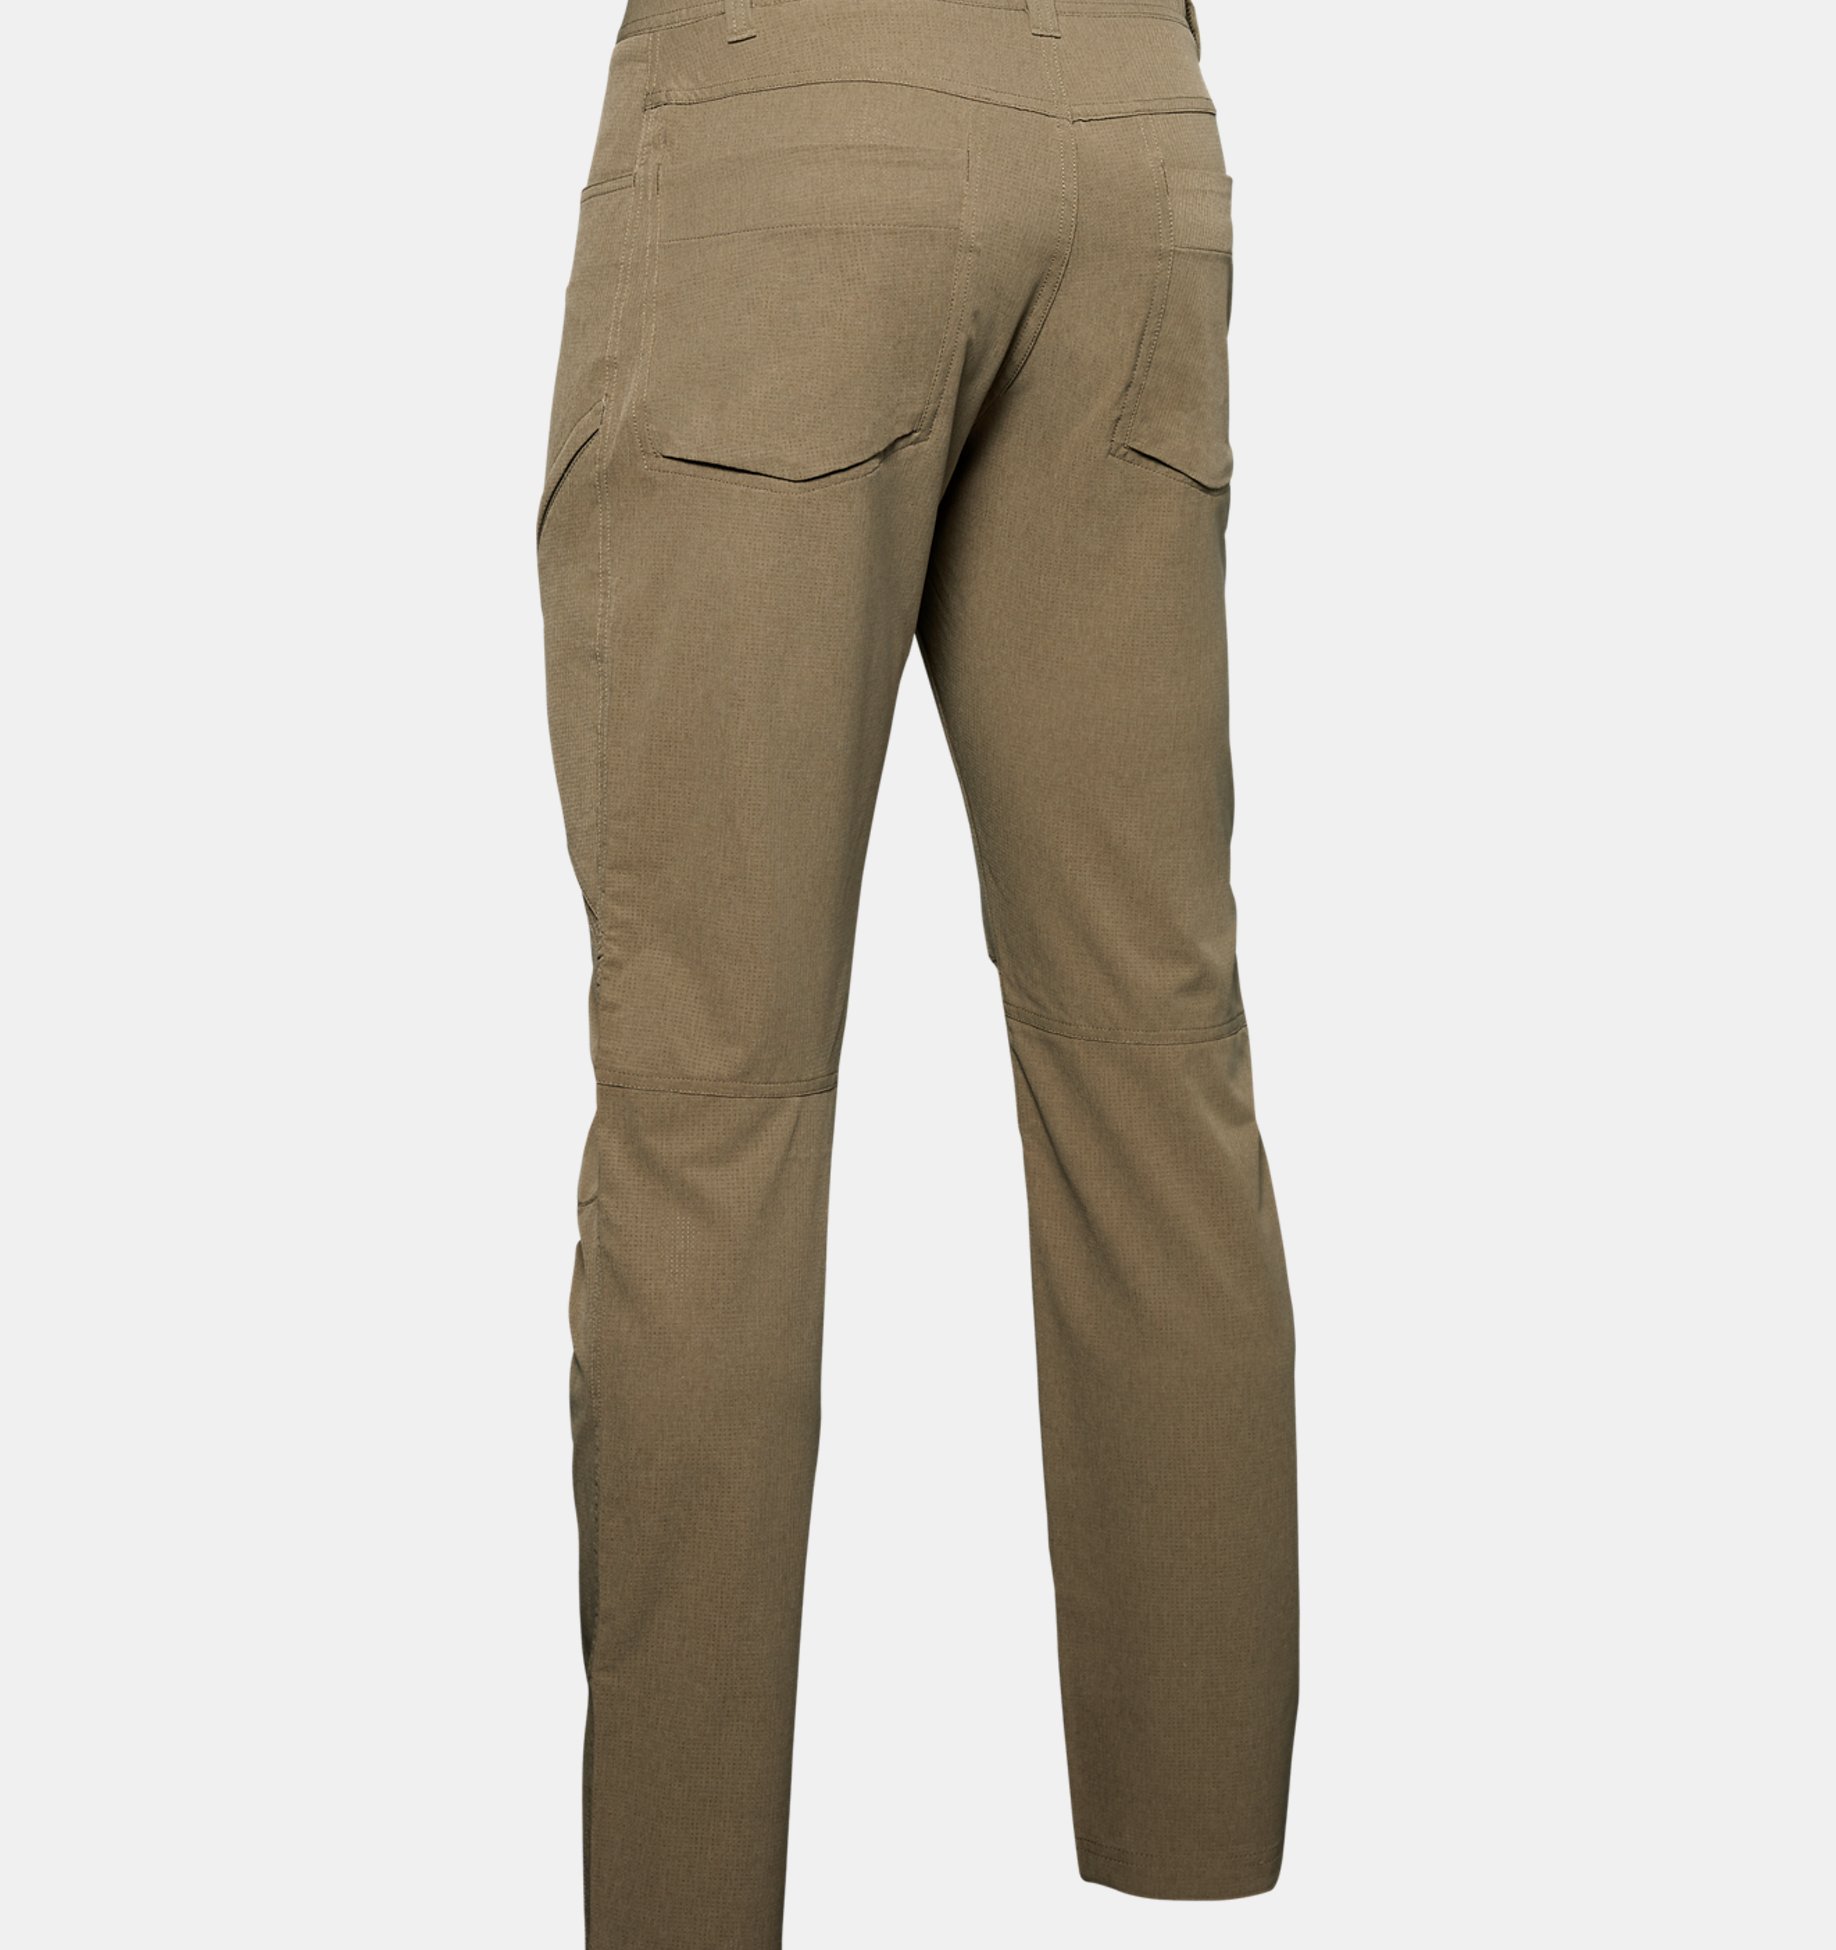 Details about   NEW Under Armour Men's Tactical Adapt Pants Size 42x32 Coyote Brown 1348645 728 